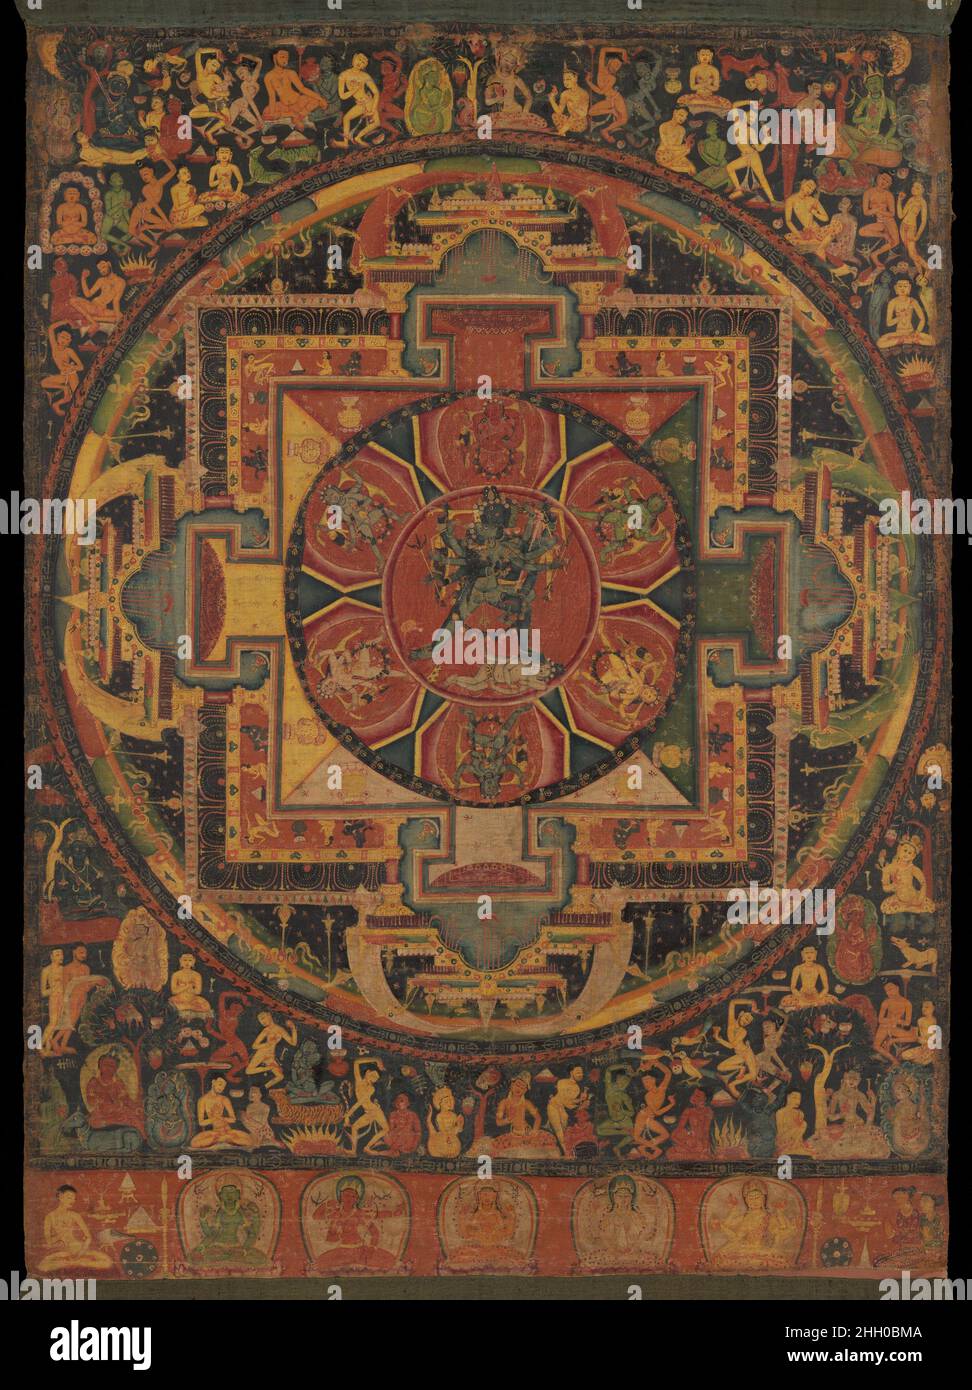 Chakrasamvara Mandala ca. 1100 Nepal This ritual diagram (mandala) is conceived as the cosmic palace of the wrathful Chakrasamvara and his consort, Vajravarahi, seen at center. These deities embody the esoteric knowledge of the Yoga Tantras. Six goddesses on stylized lotus petals surround the divine couple. Framing the mandala are the eight great burial grounds of India, each presided over by a deity beneath a tree. The cemeteries are appropriate places for meditation on Chakrasamvara and are emblematic of the various realms of existence. The lower register contains five forms of the goddess T Stock Photo